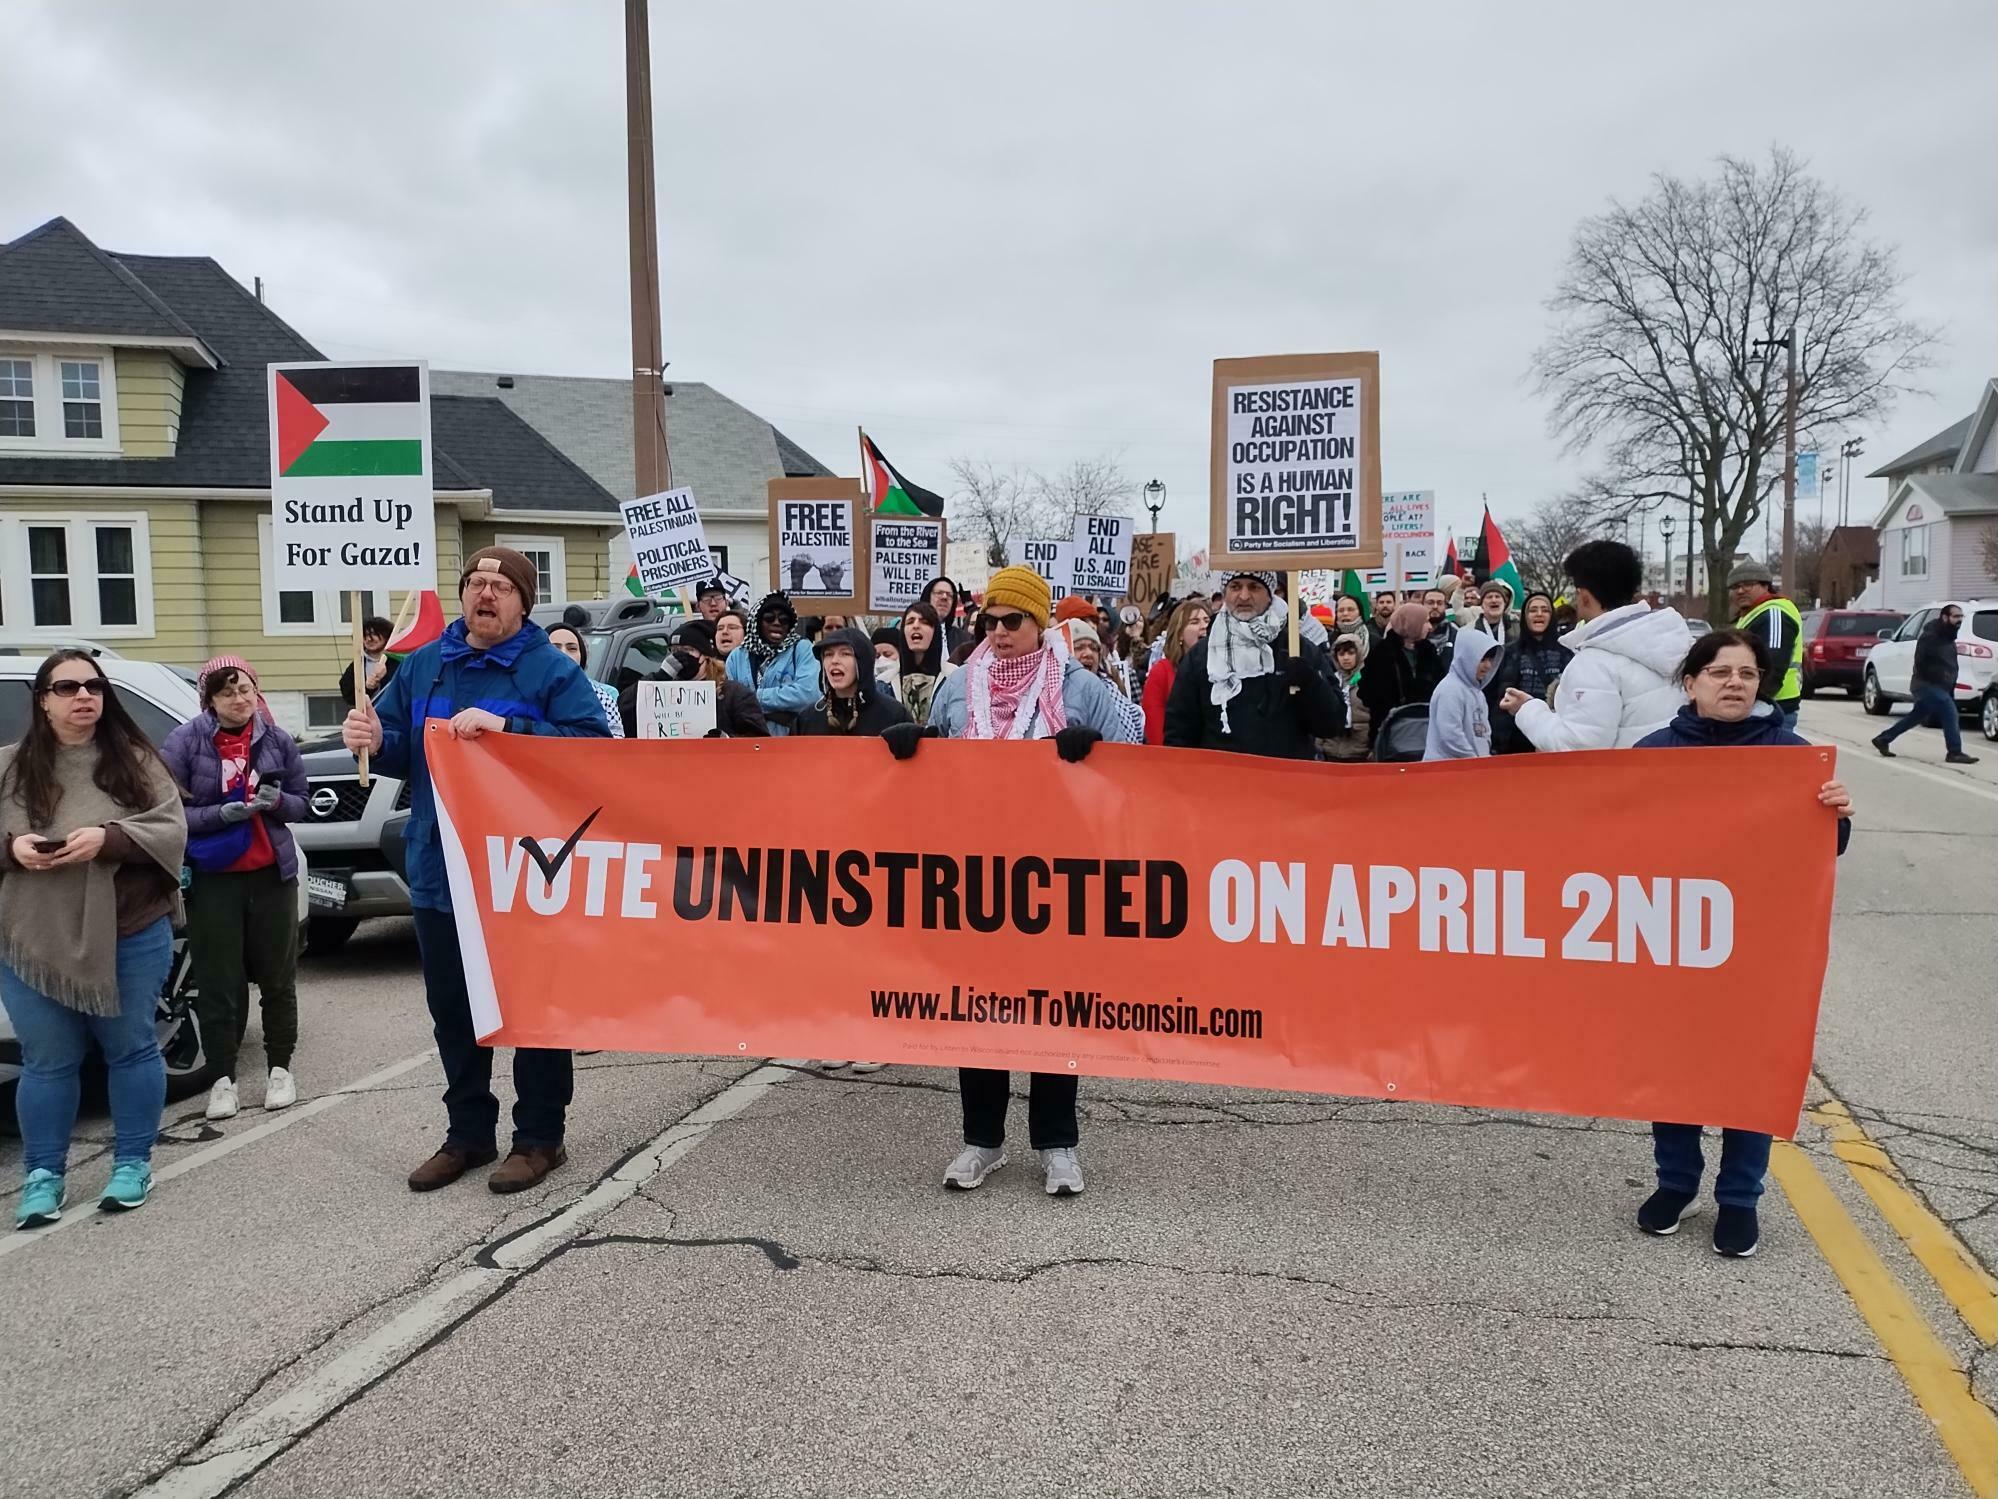 Supporters of the "Vote Uninstructed" movement join a pro-Palestinian march in Milwaukee last Saturday.